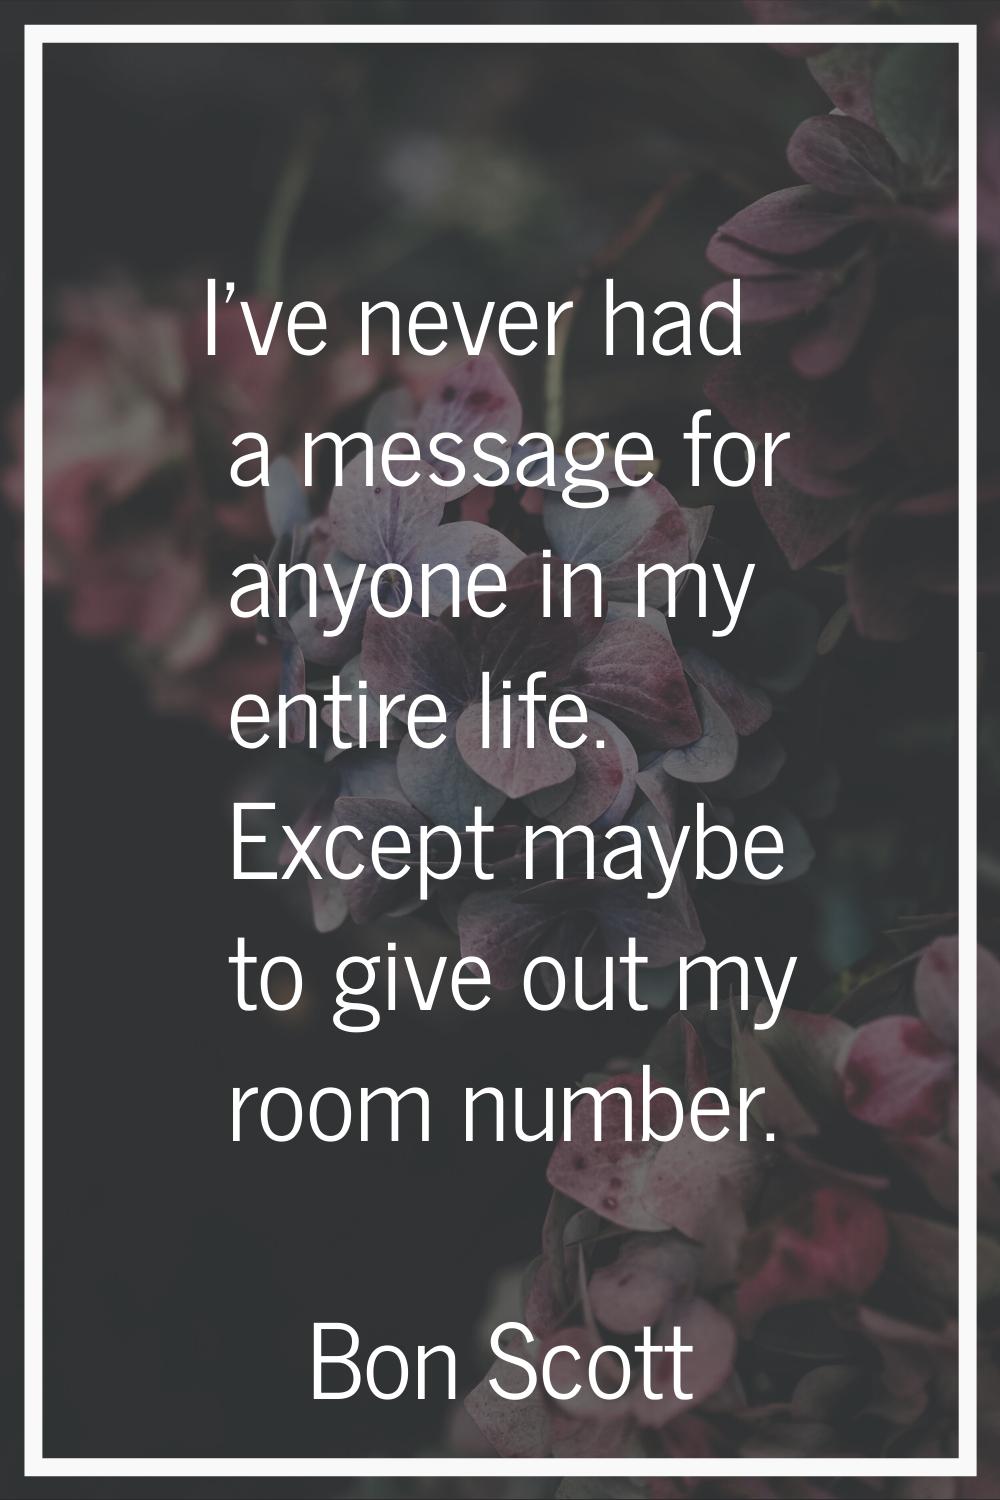 I've never had a message for anyone in my entire life. Except maybe to give out my room number.